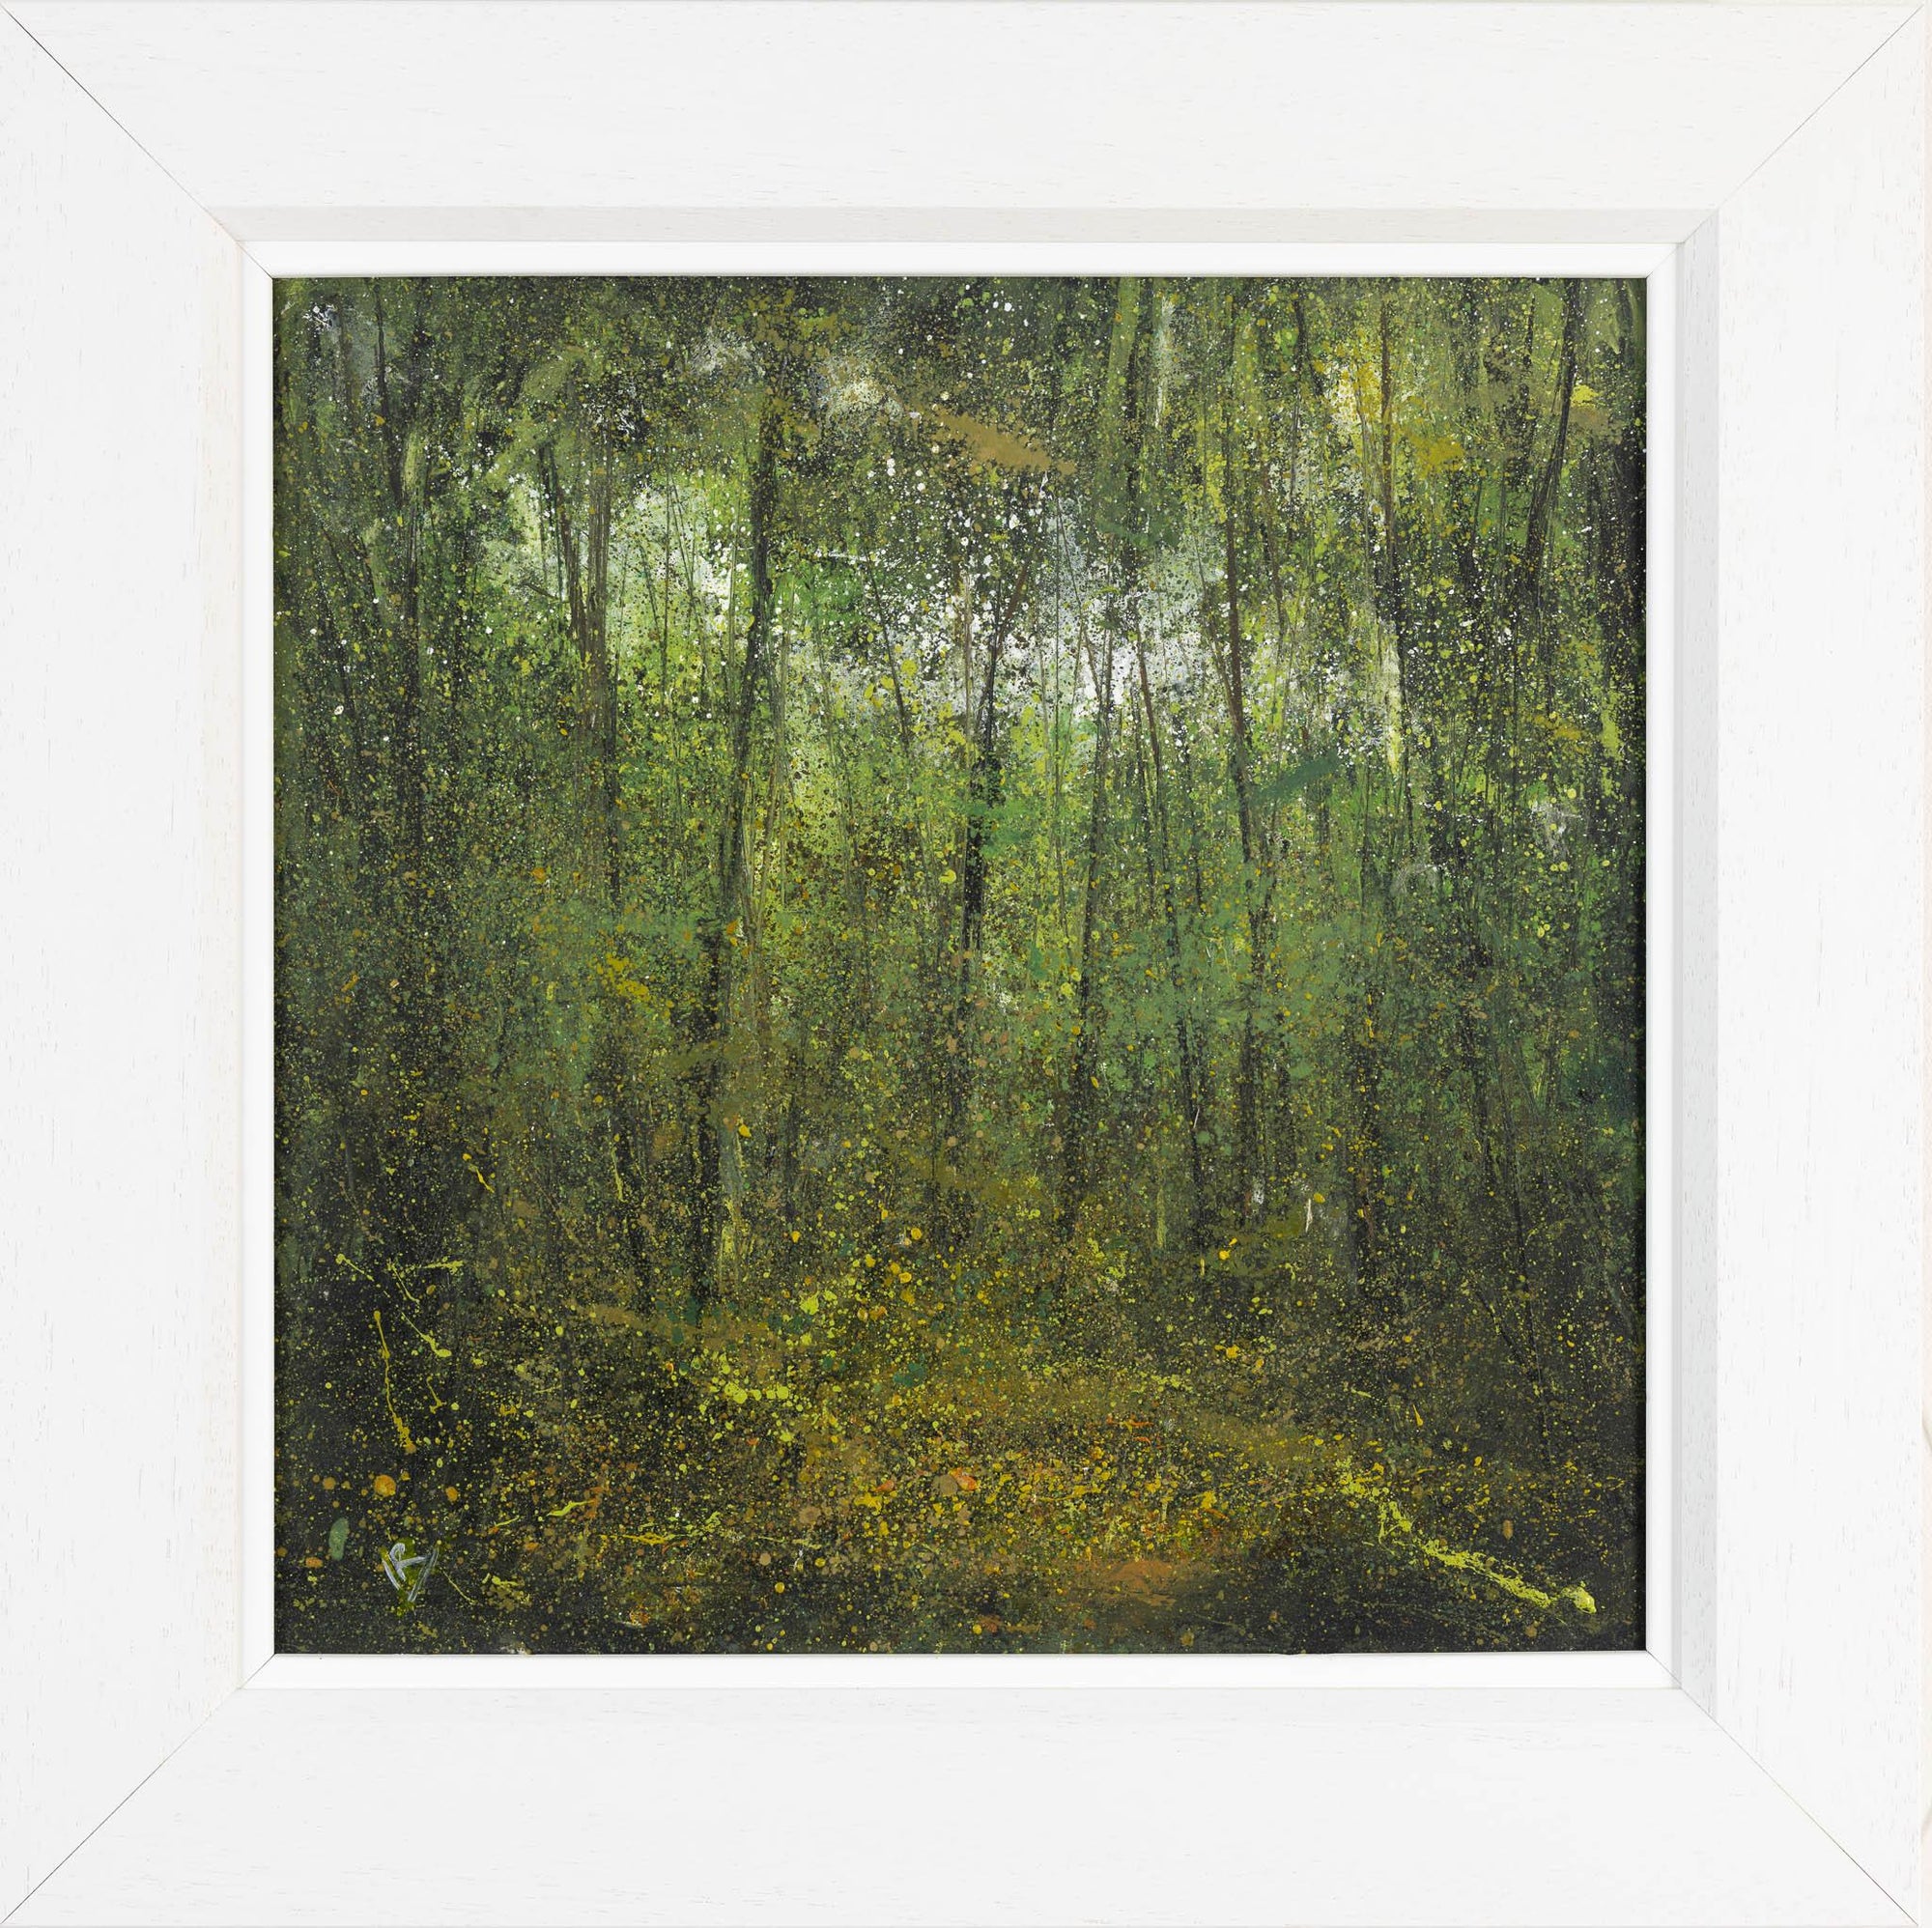 'Woodland Walk' oil, original by Ian Rawnsley, available at Padstow Gallery, Cornwall